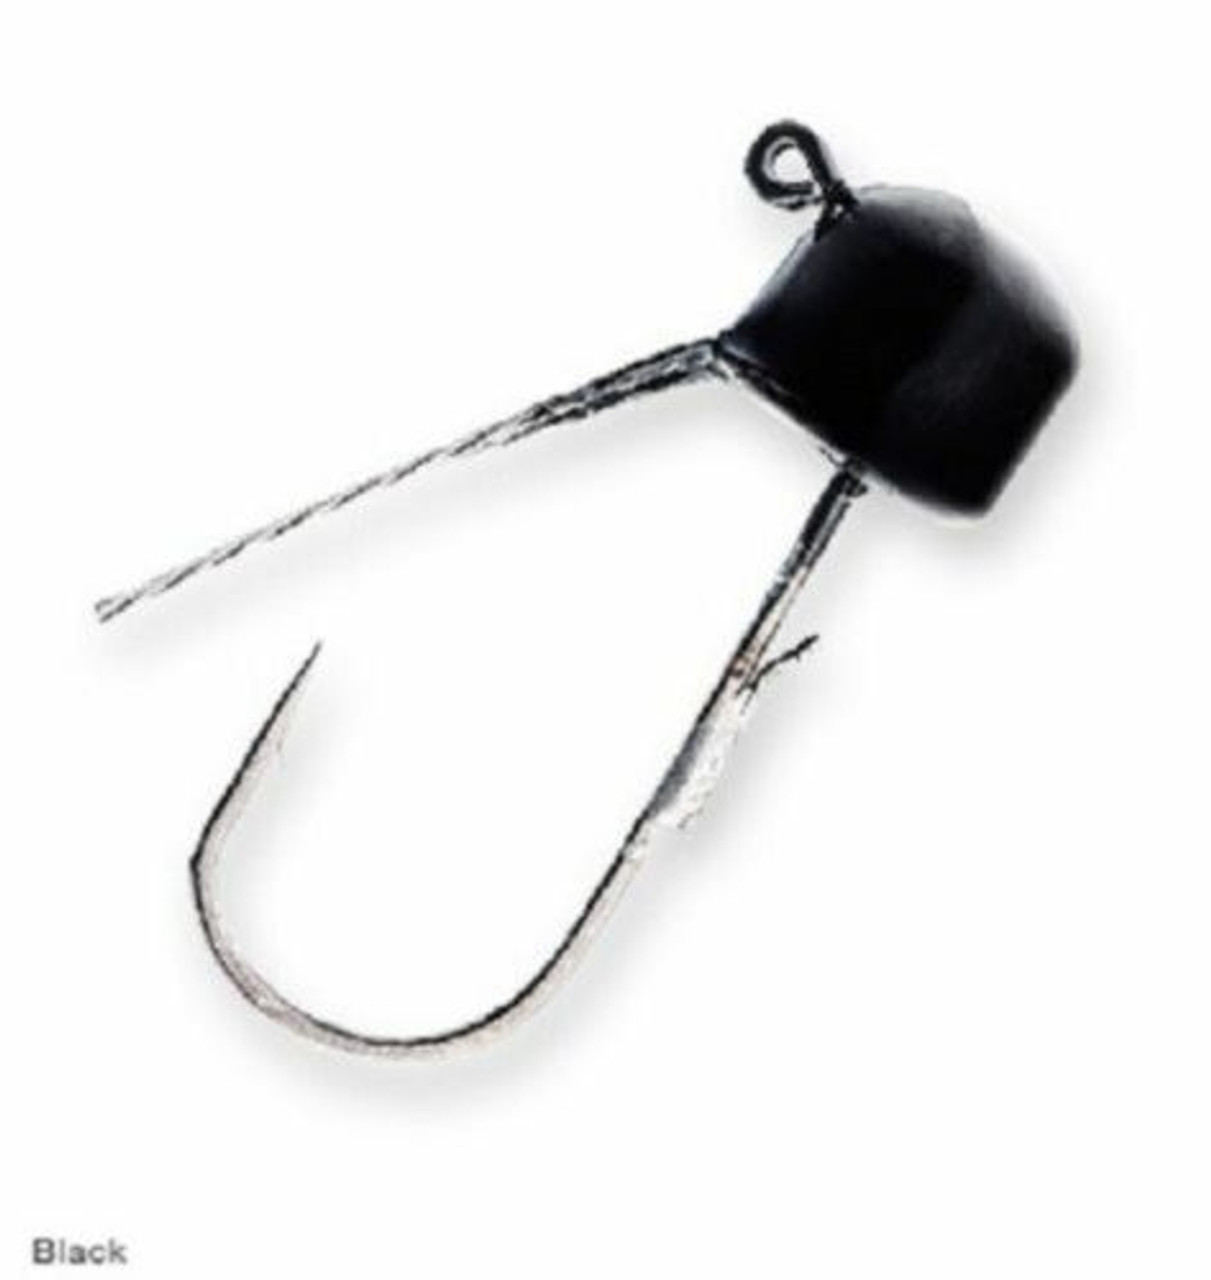 Z-MAN WEEDLESS Finesse ShroomZ Ned Rig Jig Heads FJHW- PK5 CHOOSE YOUR WEIGHT & COLOR!